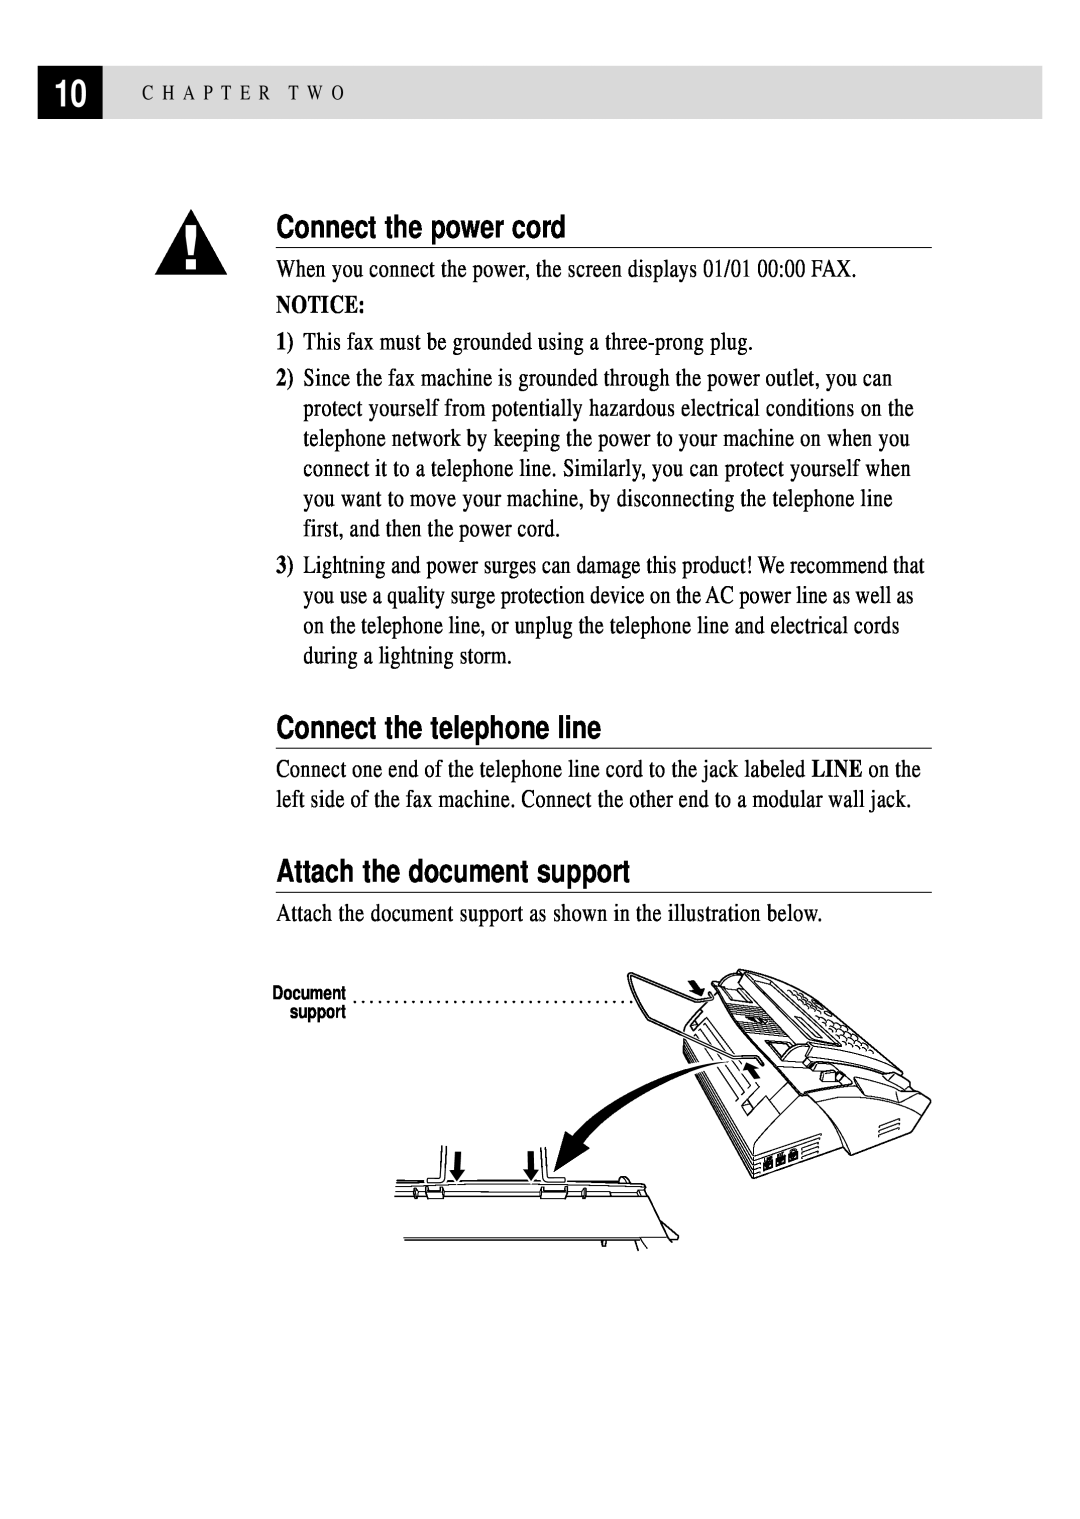 Brother FAX 255 owner manual Connect the power cord, Connect the telephone line, Attach the document support 